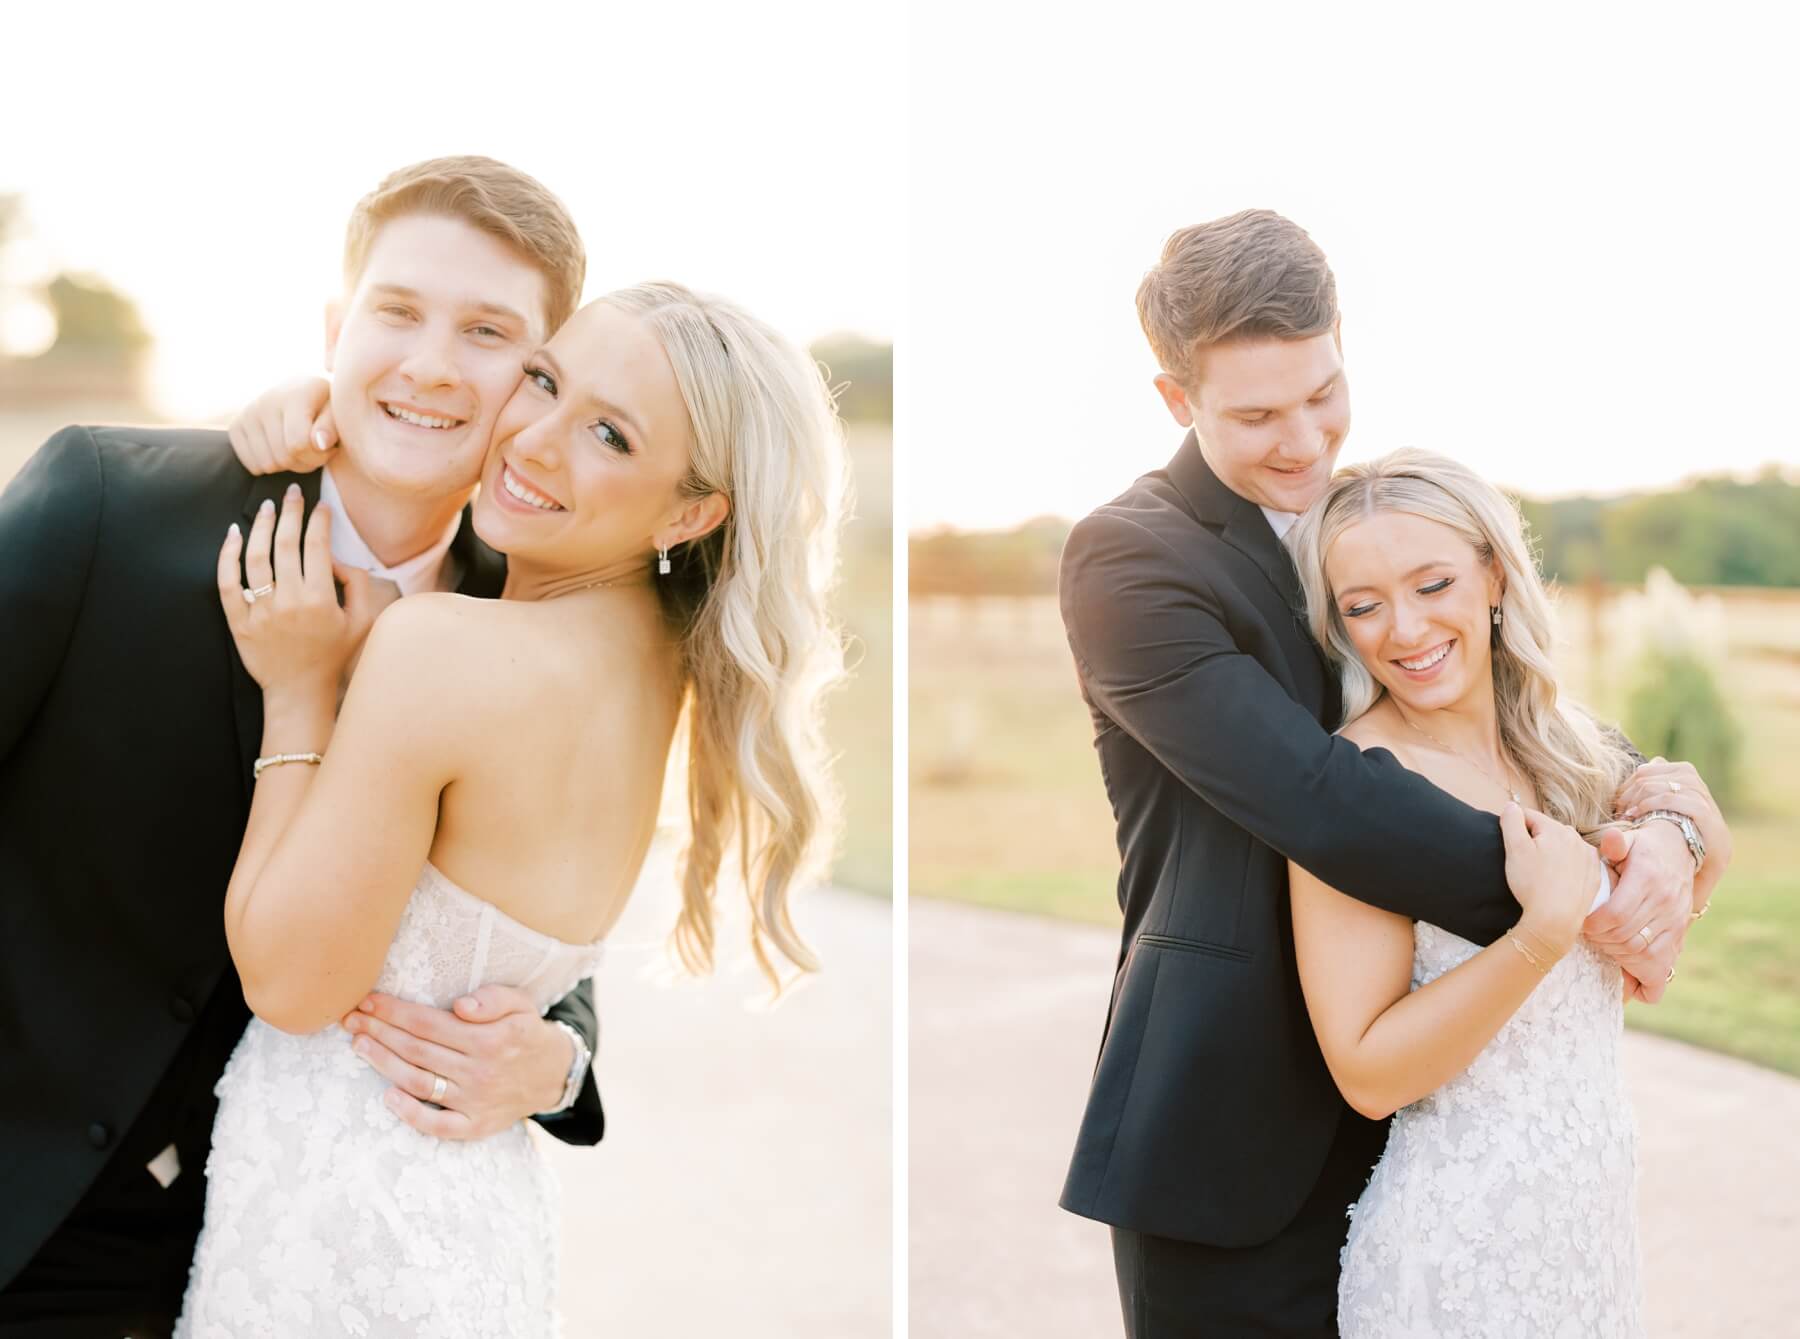 Bride and groom taking couple's photos during golden hour at The Springs in McKinney